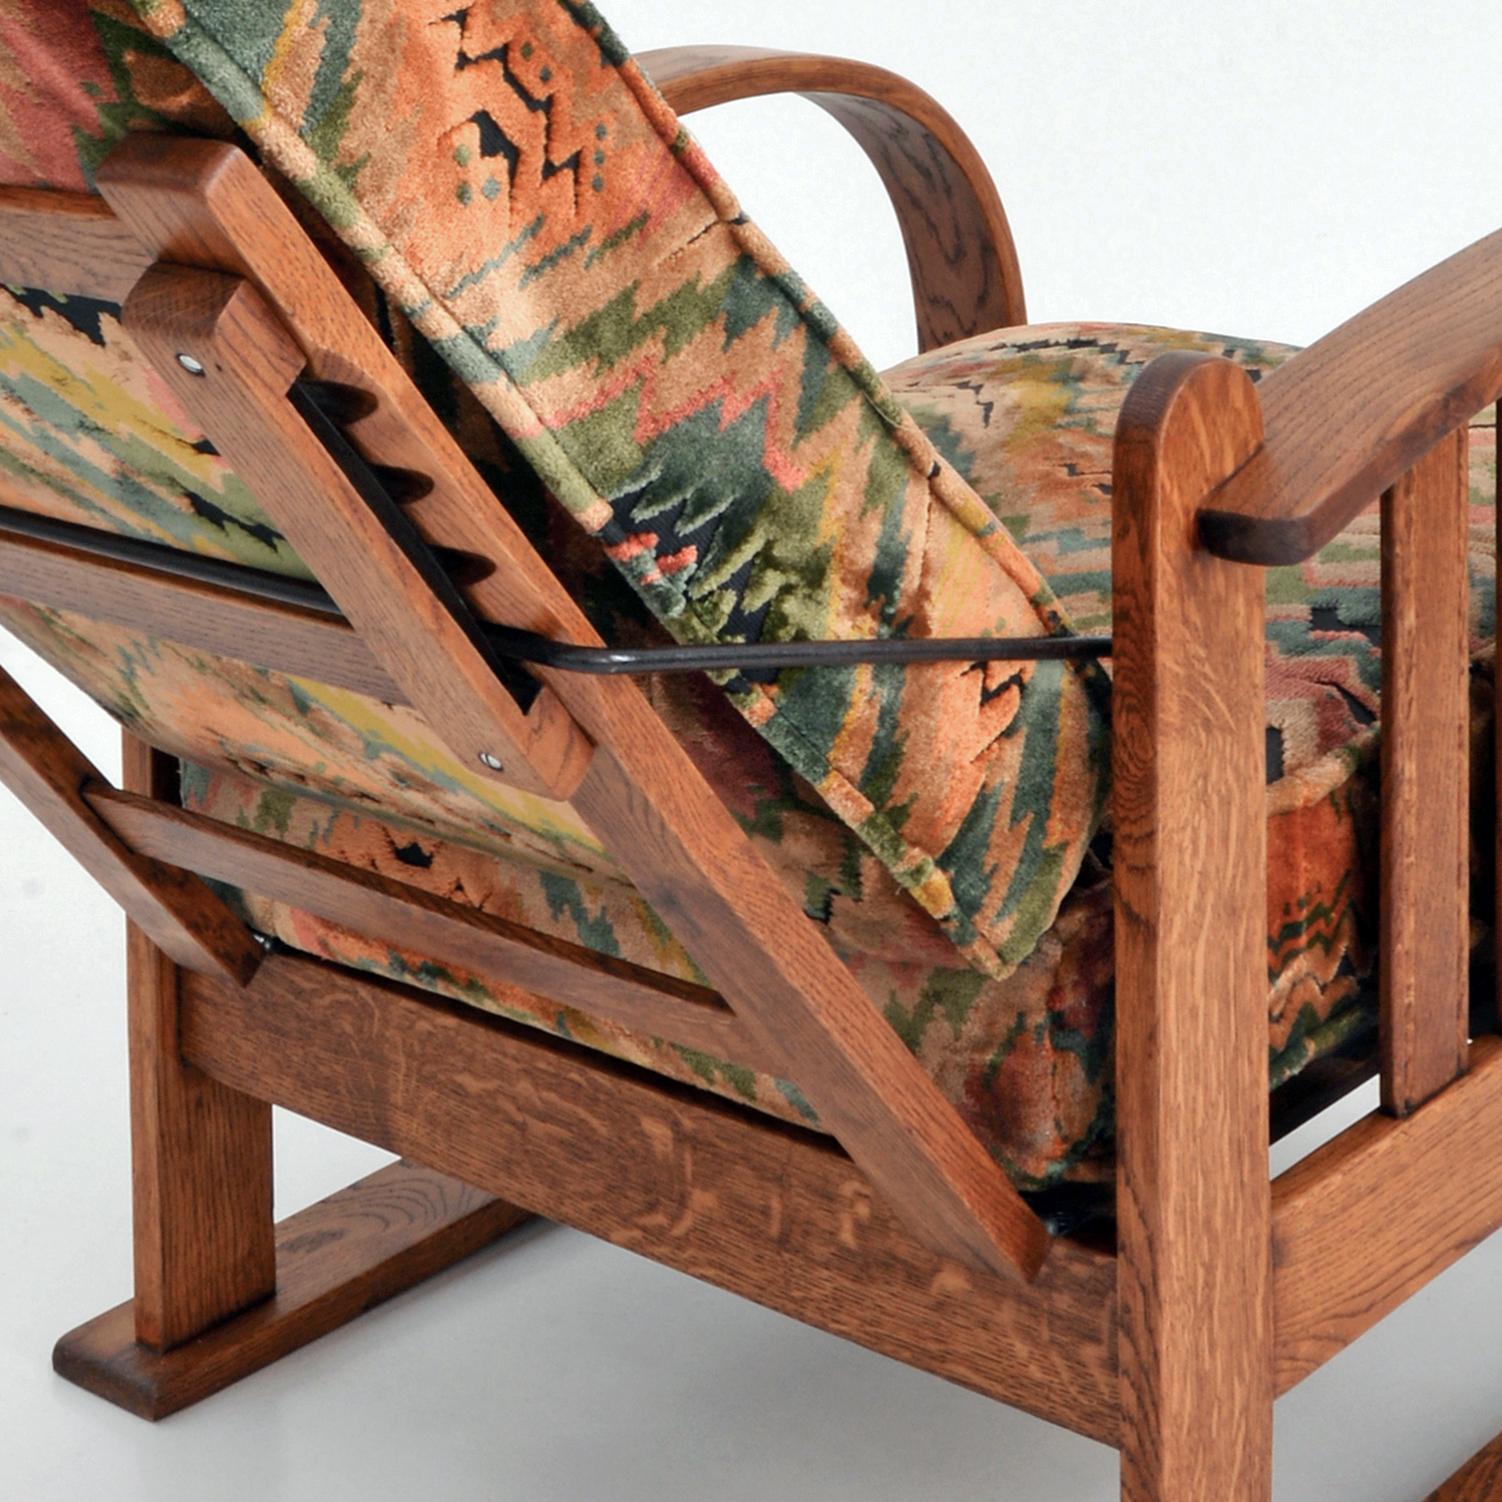 Expressionist Amsterdam School Reclining Chairs, Oak and Fabric Upholstery, 1920 In Good Condition For Sale In Berlin, DE